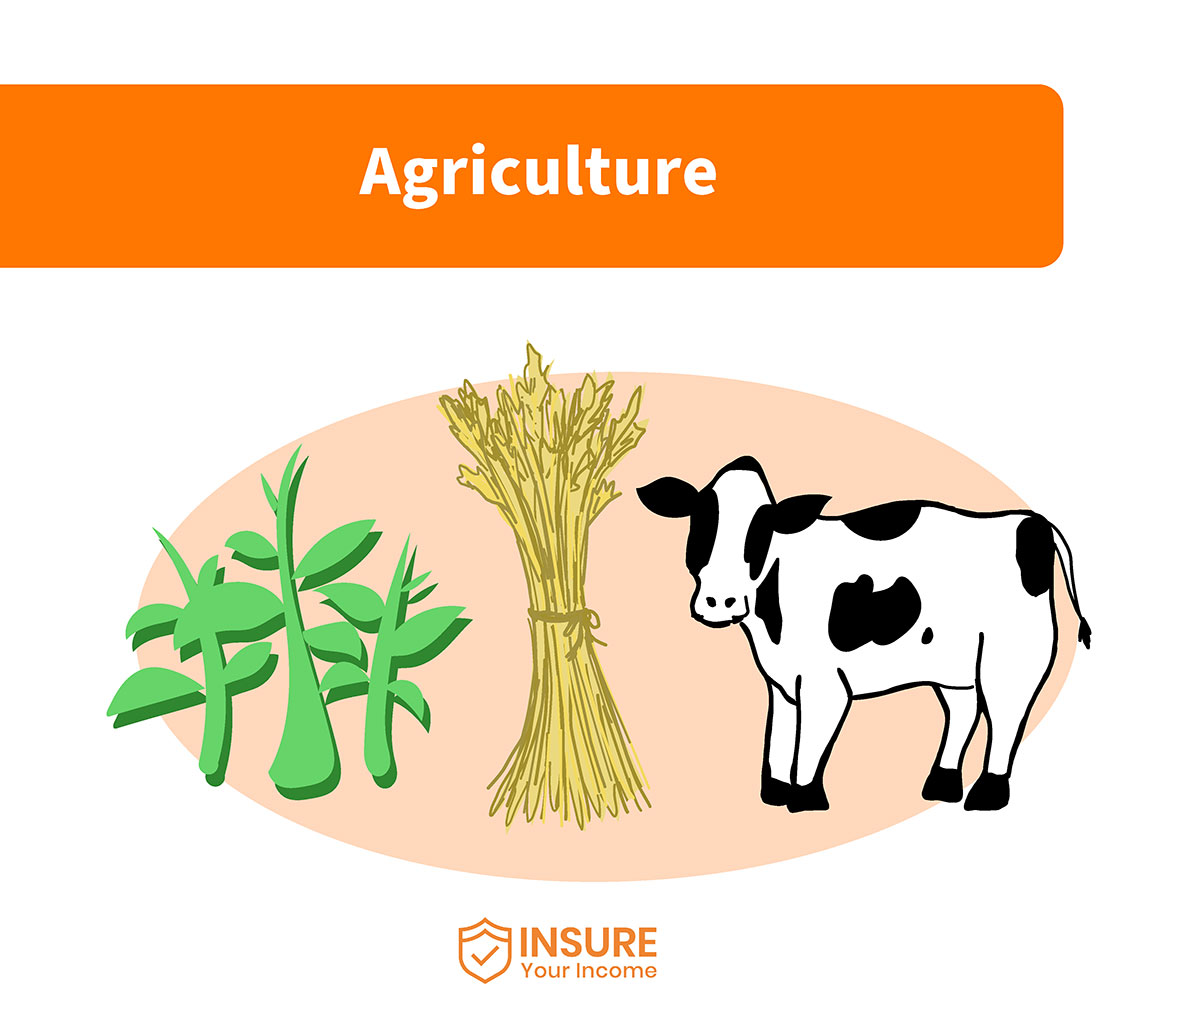 Insure your income for agriculture 